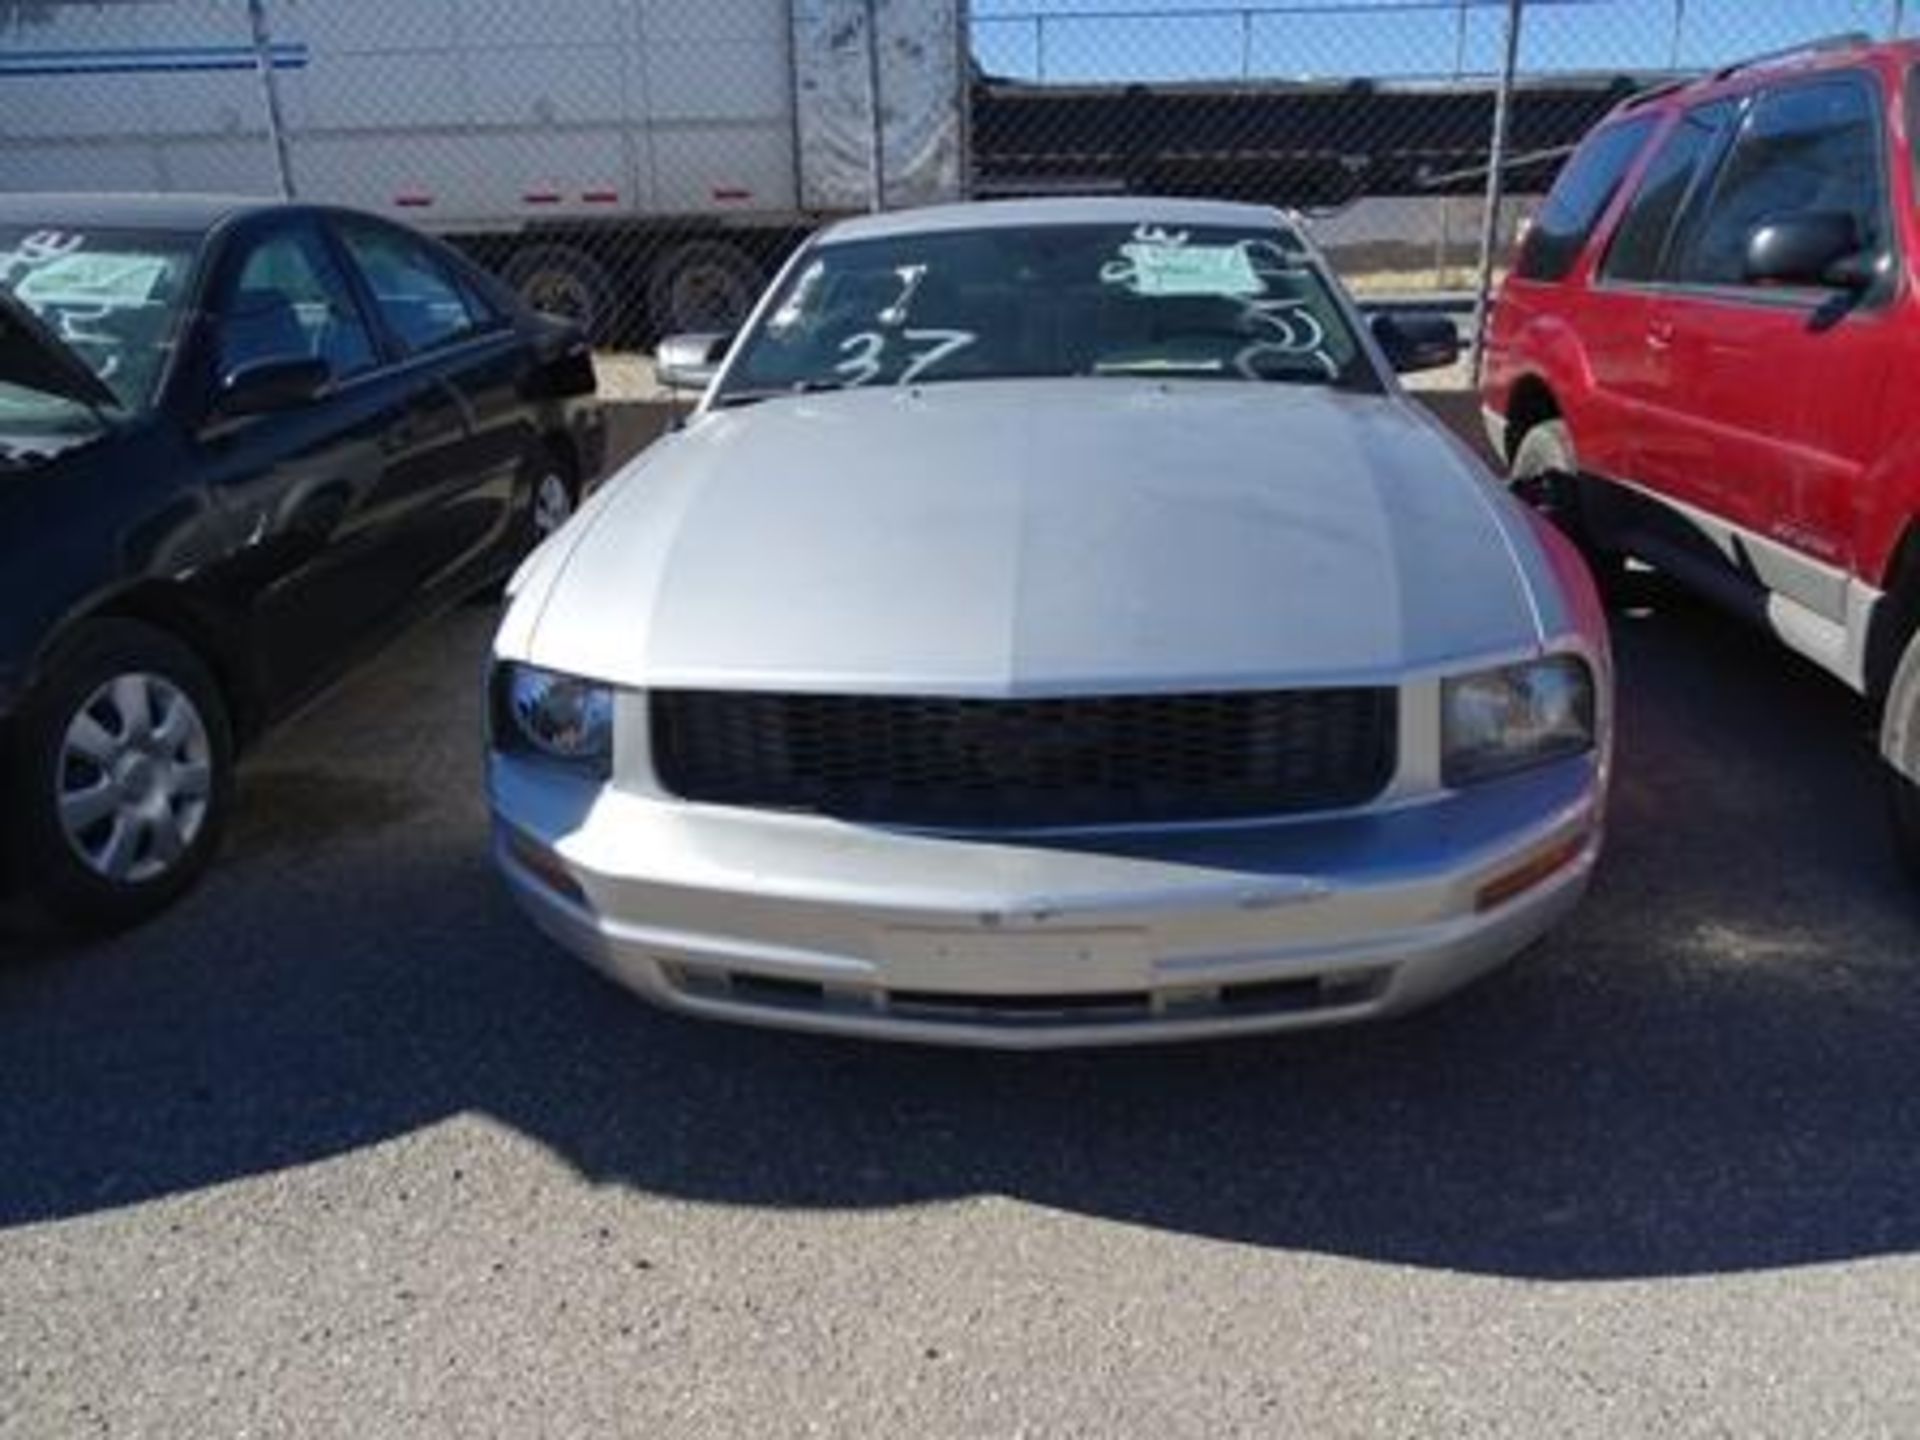 Vehículo Marca Ford Mustang, Tipo Sedan, Modelo 2007, Located In: Chihuahua, Deposit Of: $5000 - Image 8 of 17